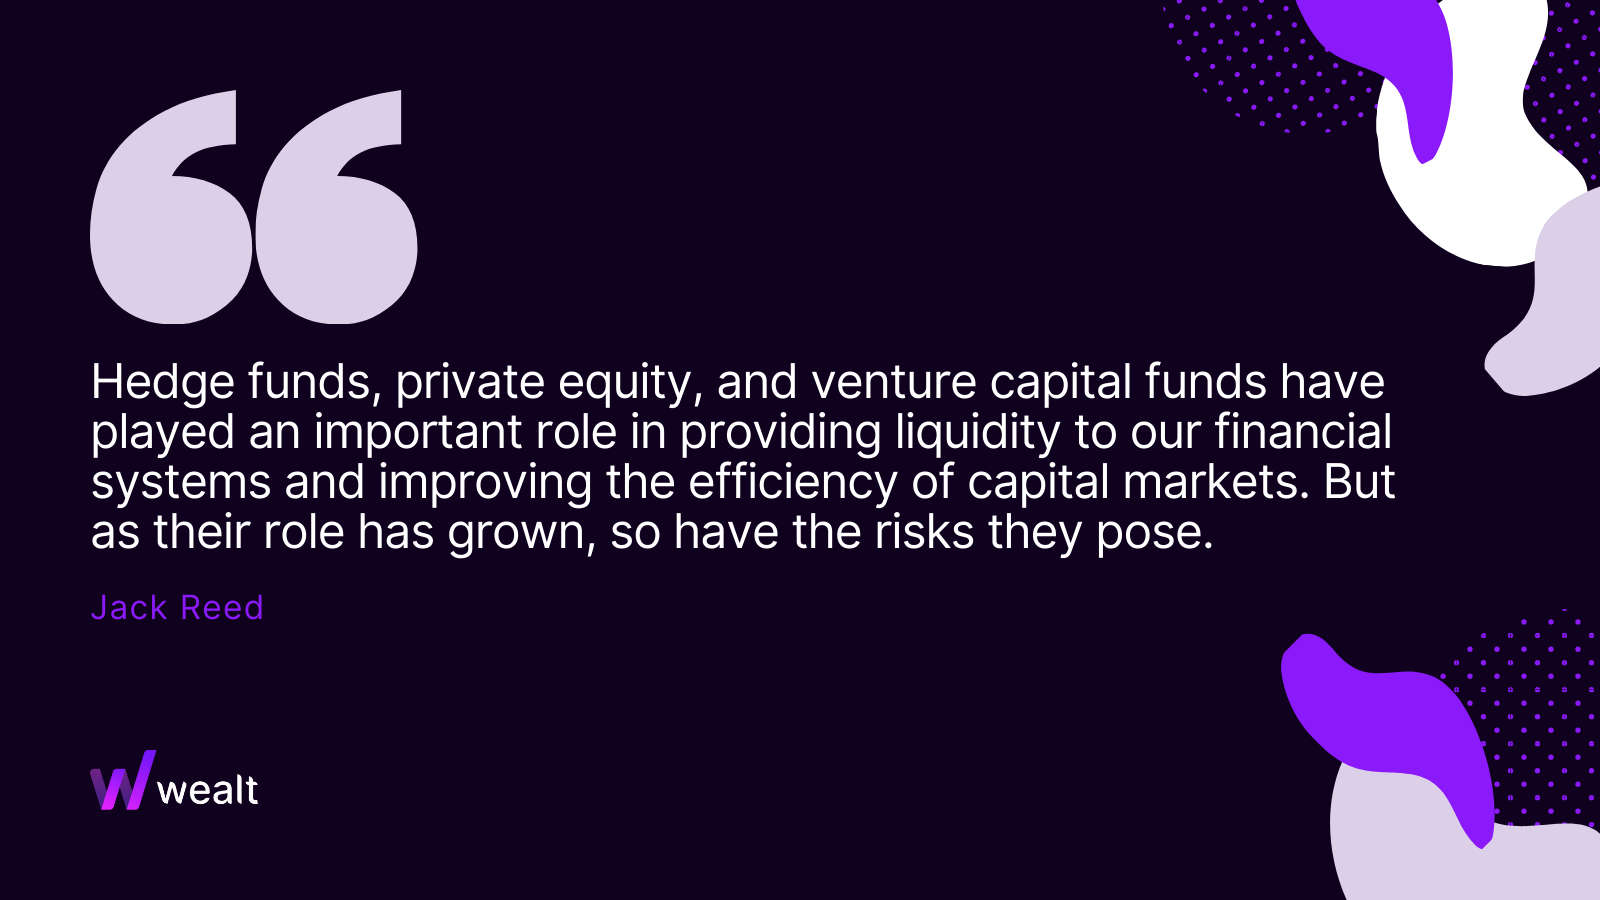 Hedge funds, private equity, and venture capital funds have played an important role in providing liquidity to our financial systems and improving the efficiency of capital markets. But as their role has grown, so have the risks they pose. -Jack Reed